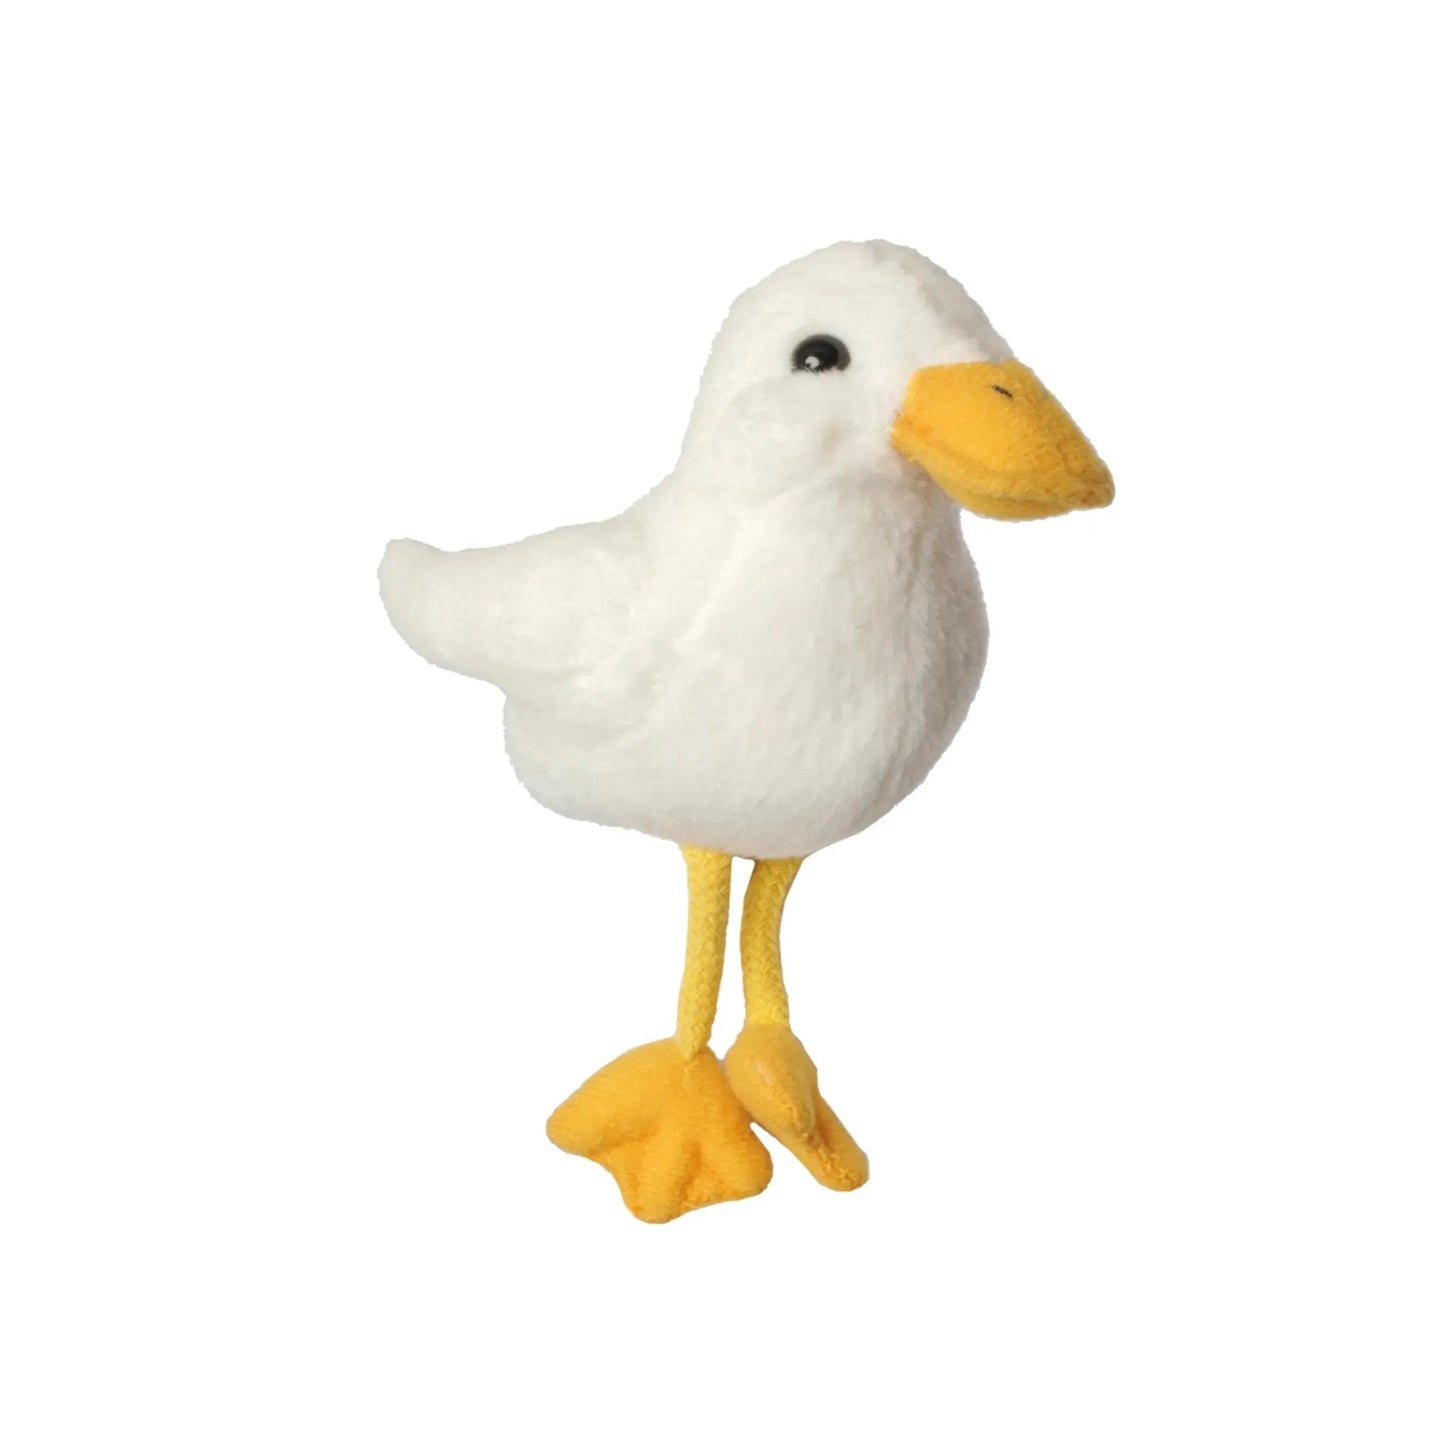 Duck (White) Finger Puppet - The Puppet Company - The Forgotten Toy Shop